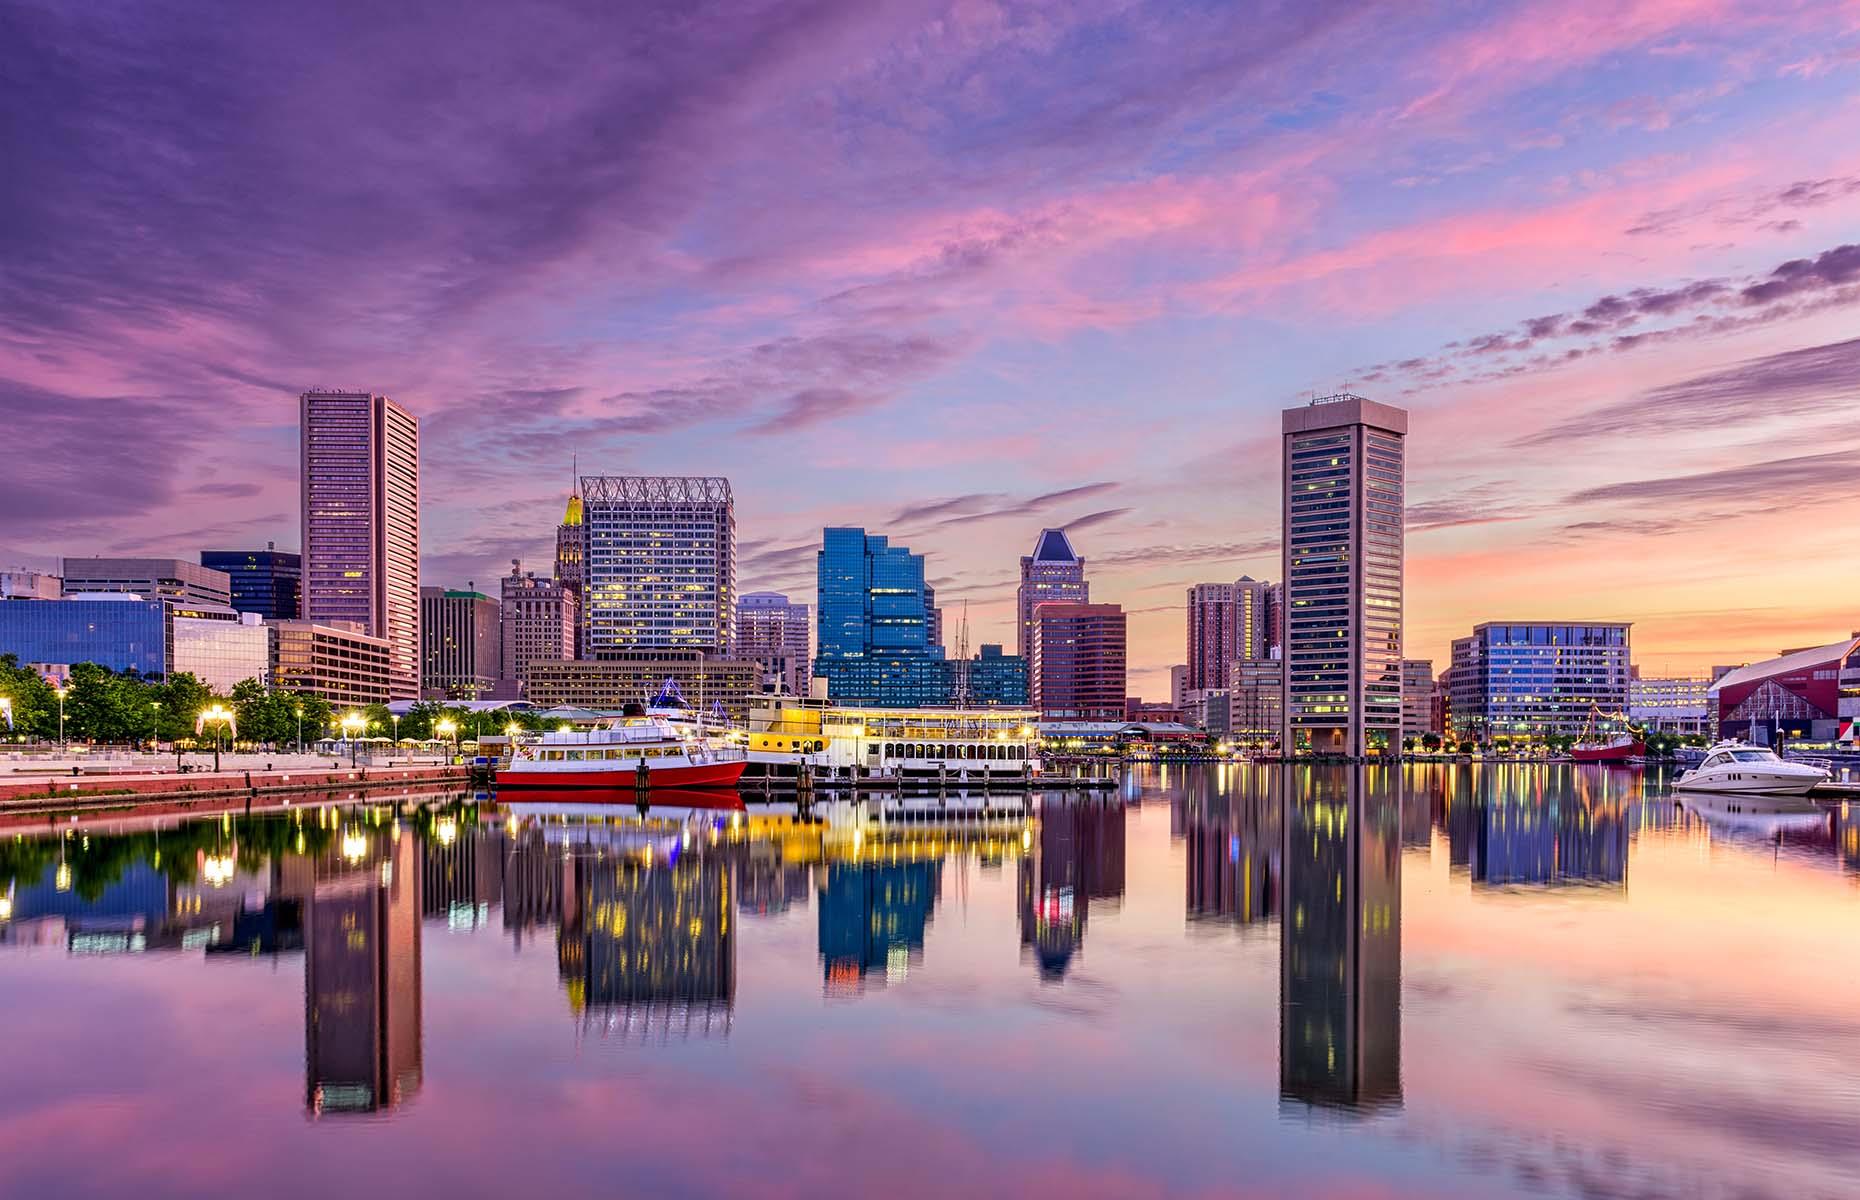 <p>See Baltimore's prettiest side as you hop on board a sailboat and enjoy a beautiful sunset on the water. As the day draws to a close, you'll be treated to a symphony of colors over Fort McHenry and the city as well as some wine, cheese and crackers on the deck. Prices <a href="https://www.airbnb.com/experiences/837747?irgwc=1&irclid=0wm12rU21zryRz-X29x6O1wtUkBX5JzrwzlPU00&ircid=5503&sharedid=lovemoney.com&iratid=12347&c=.pi73.pk5503_10078&af=10078&iradid=378143">start from around $125</a> per person (food and drink included).</p>